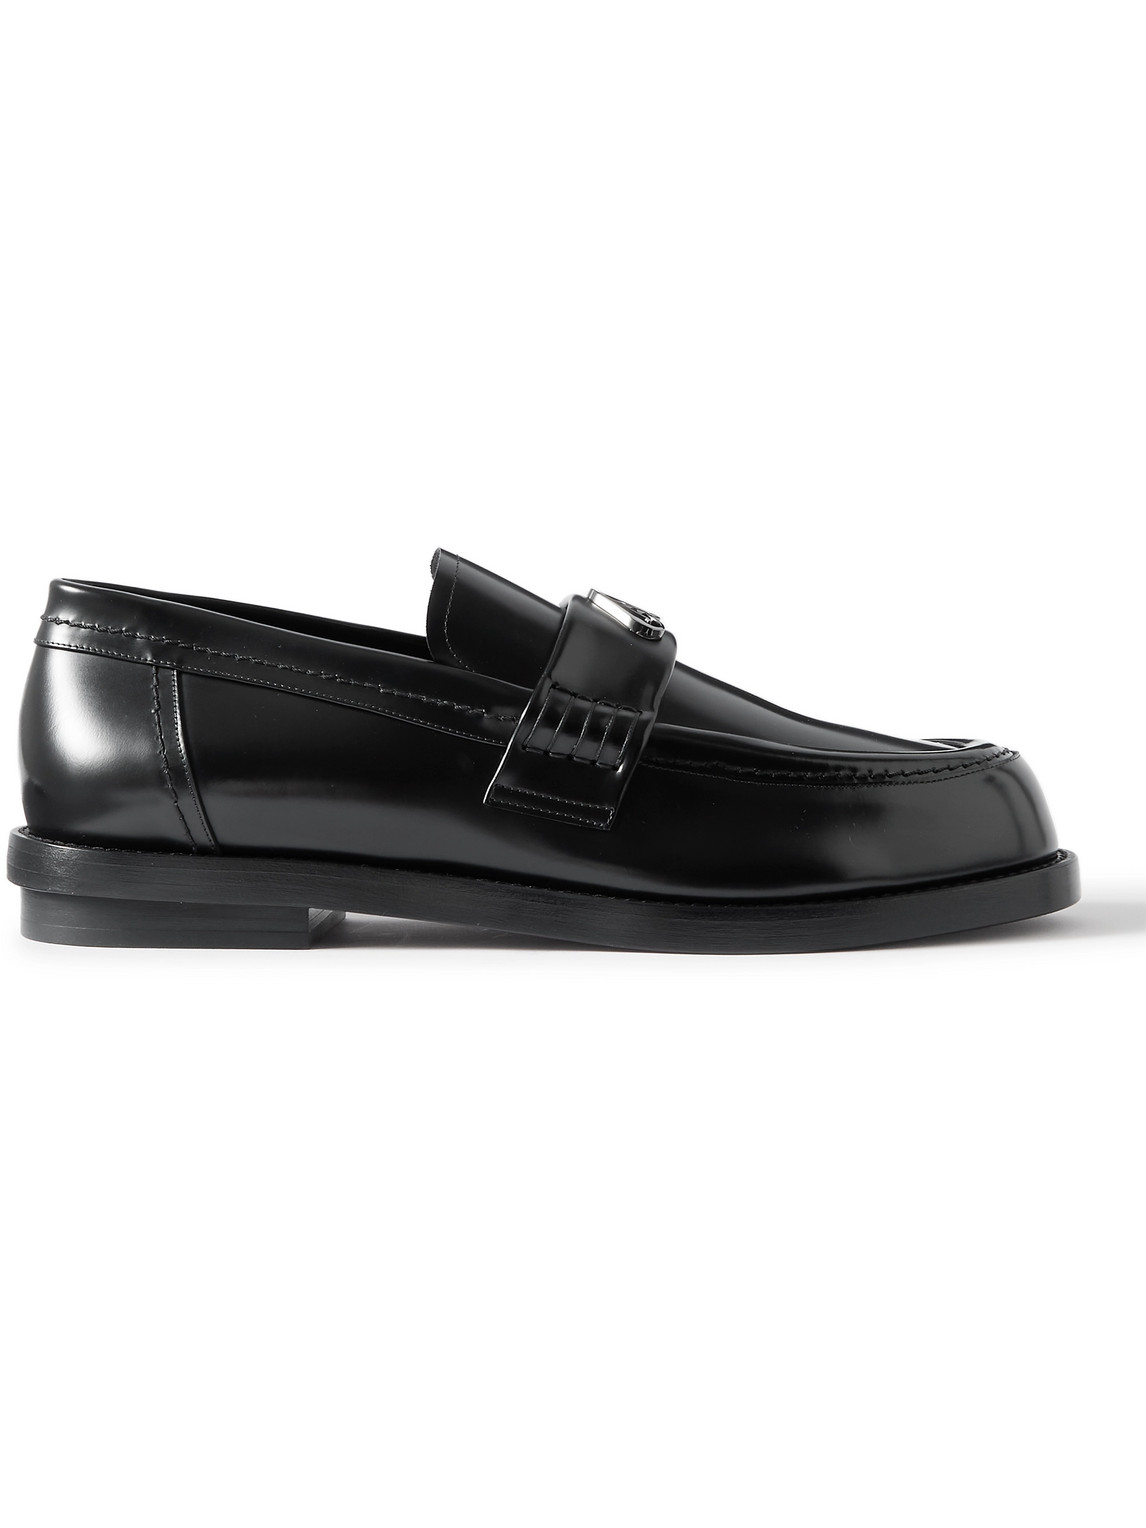 Alexander Mcqueen Seal Embellished Patent-leather Penny Loafers In Black